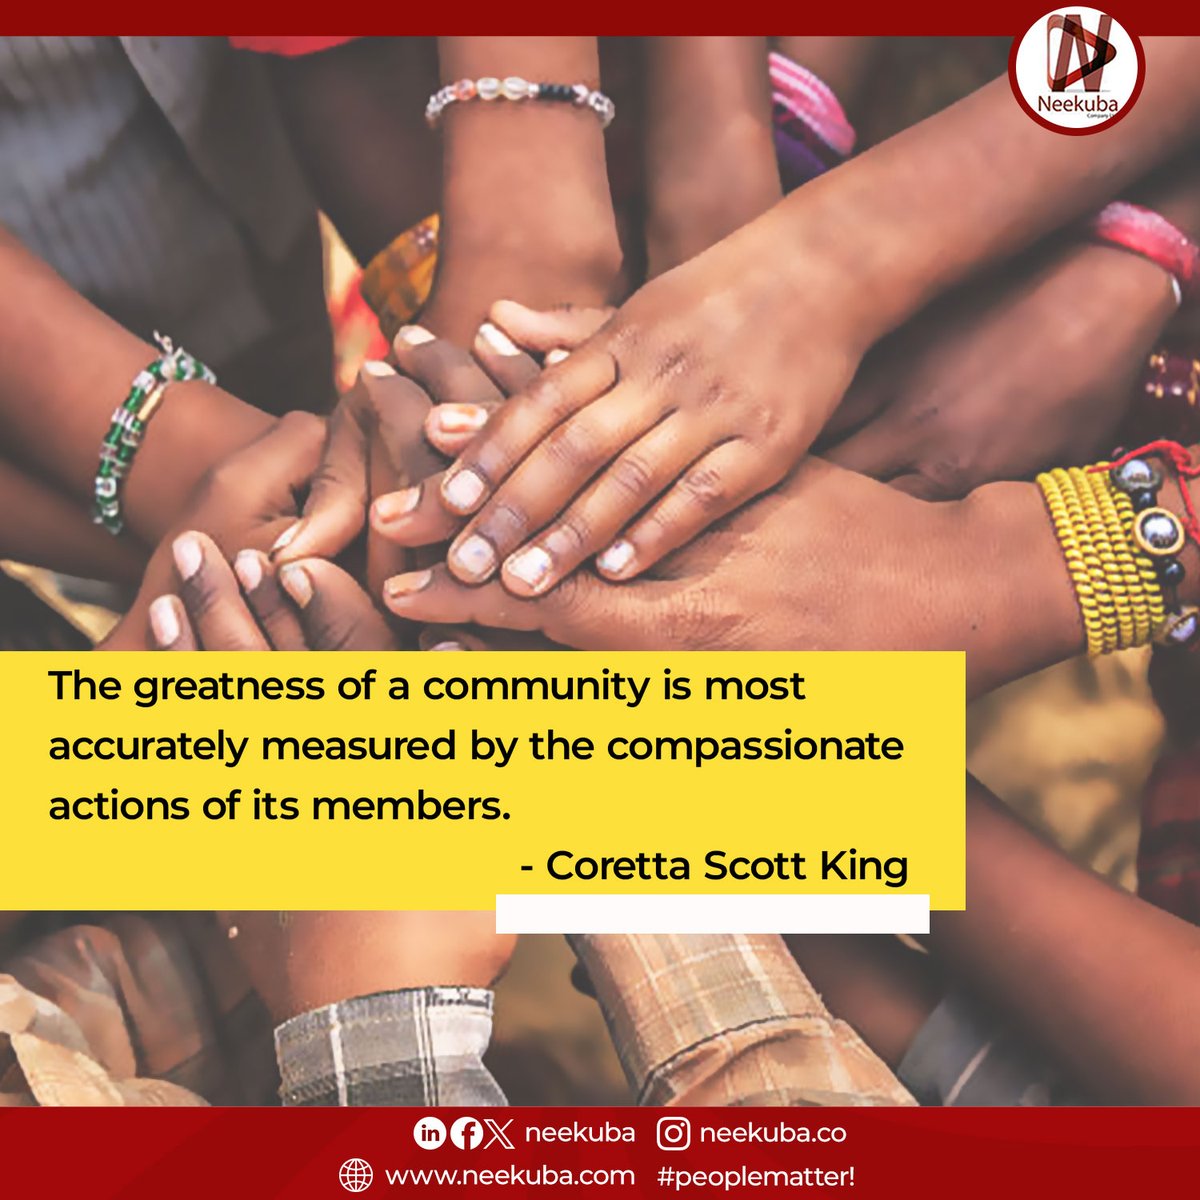 The greatness of a community is most accurately measured by the compassionate actions of its members.
-Coretta Scott King

#neekuba #peoplematter #community #greatness #compassionate #friday